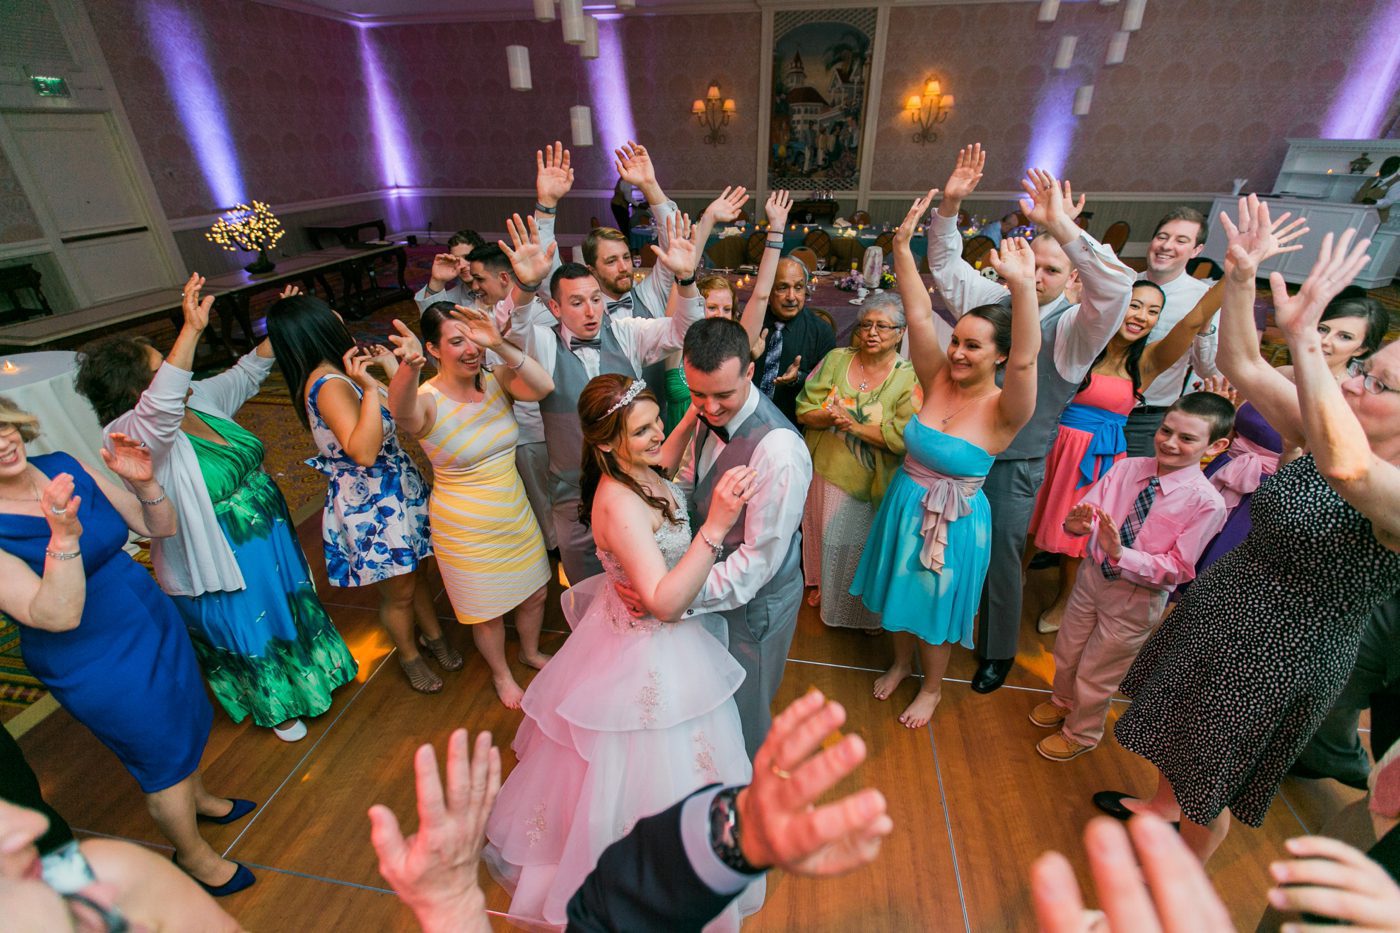 Guests dancing in a circle around the bride and groom at their Disney wedding